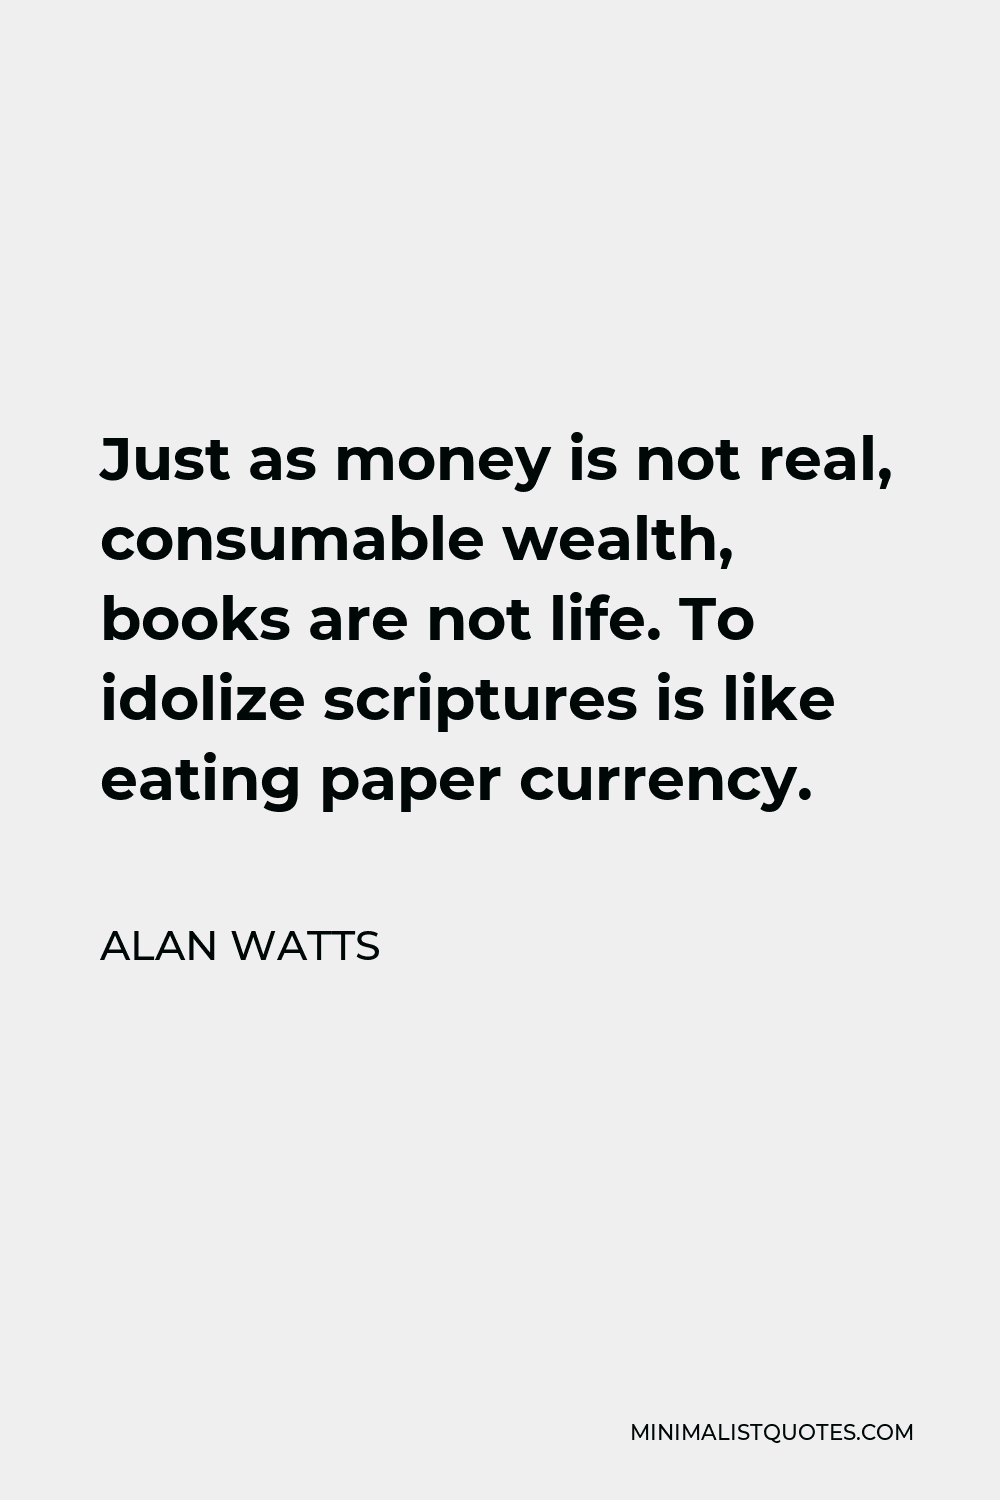 Alan Watts Quote: Just as money is not real, consumable wealth, books ...